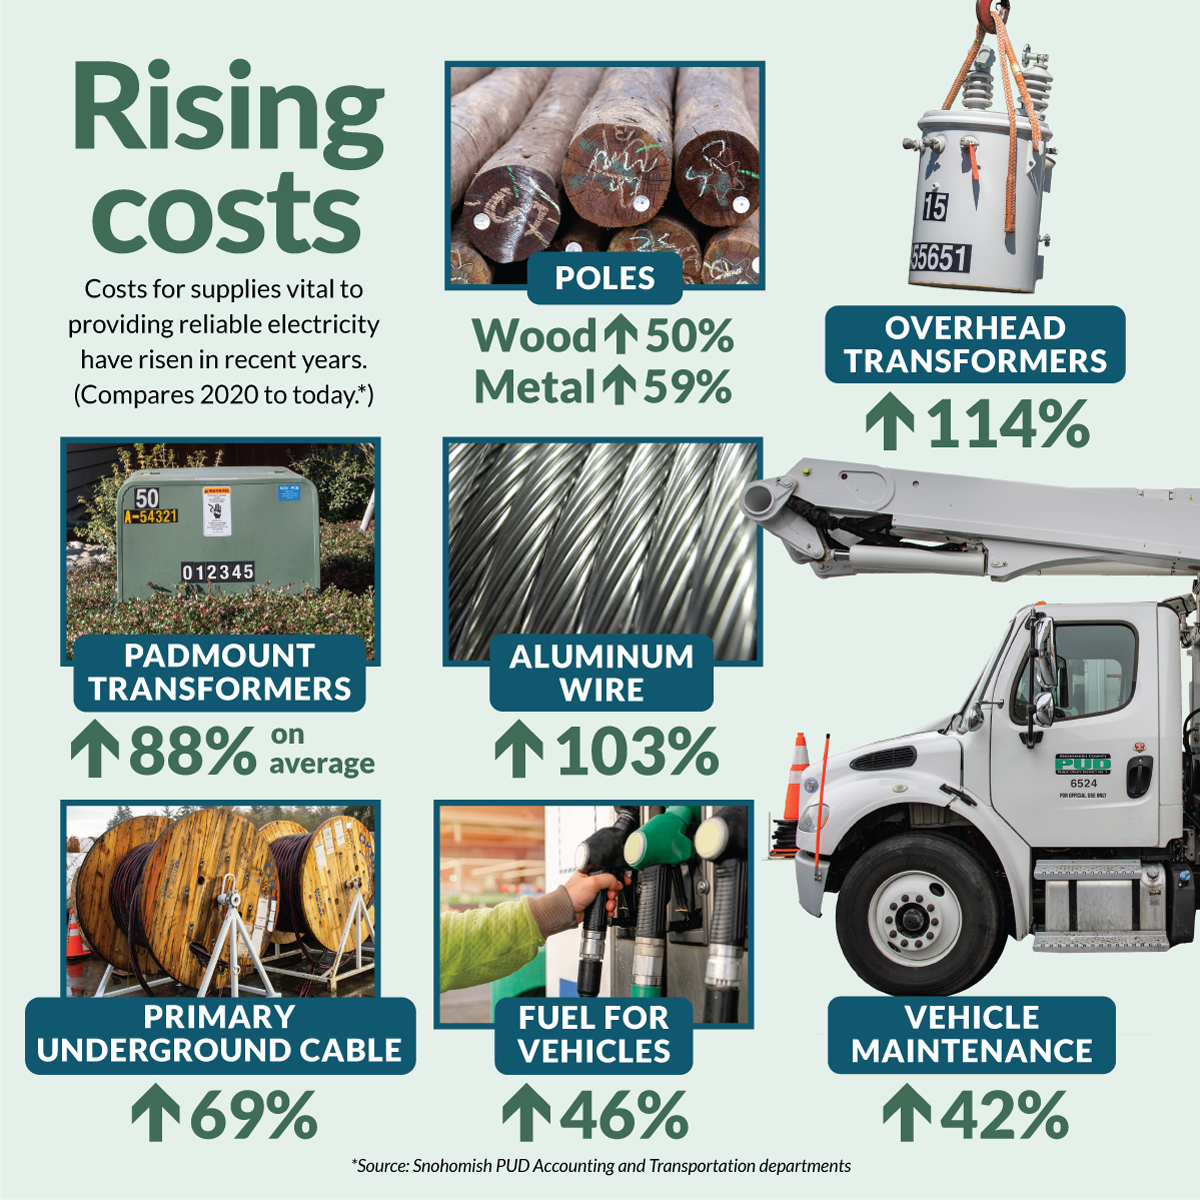 Graphic shows rising cost of electrical equipment. Wood poles up 50%, metal poles up 59%. Overhead transformers up 114%, Padmount Transformers up 88% on average, Aluminum Wire up 103%, Primary Underground Cable up 69%, Fuel for vehicles up 46%, vehicle maintenance up 42% (compares 2020 to today)